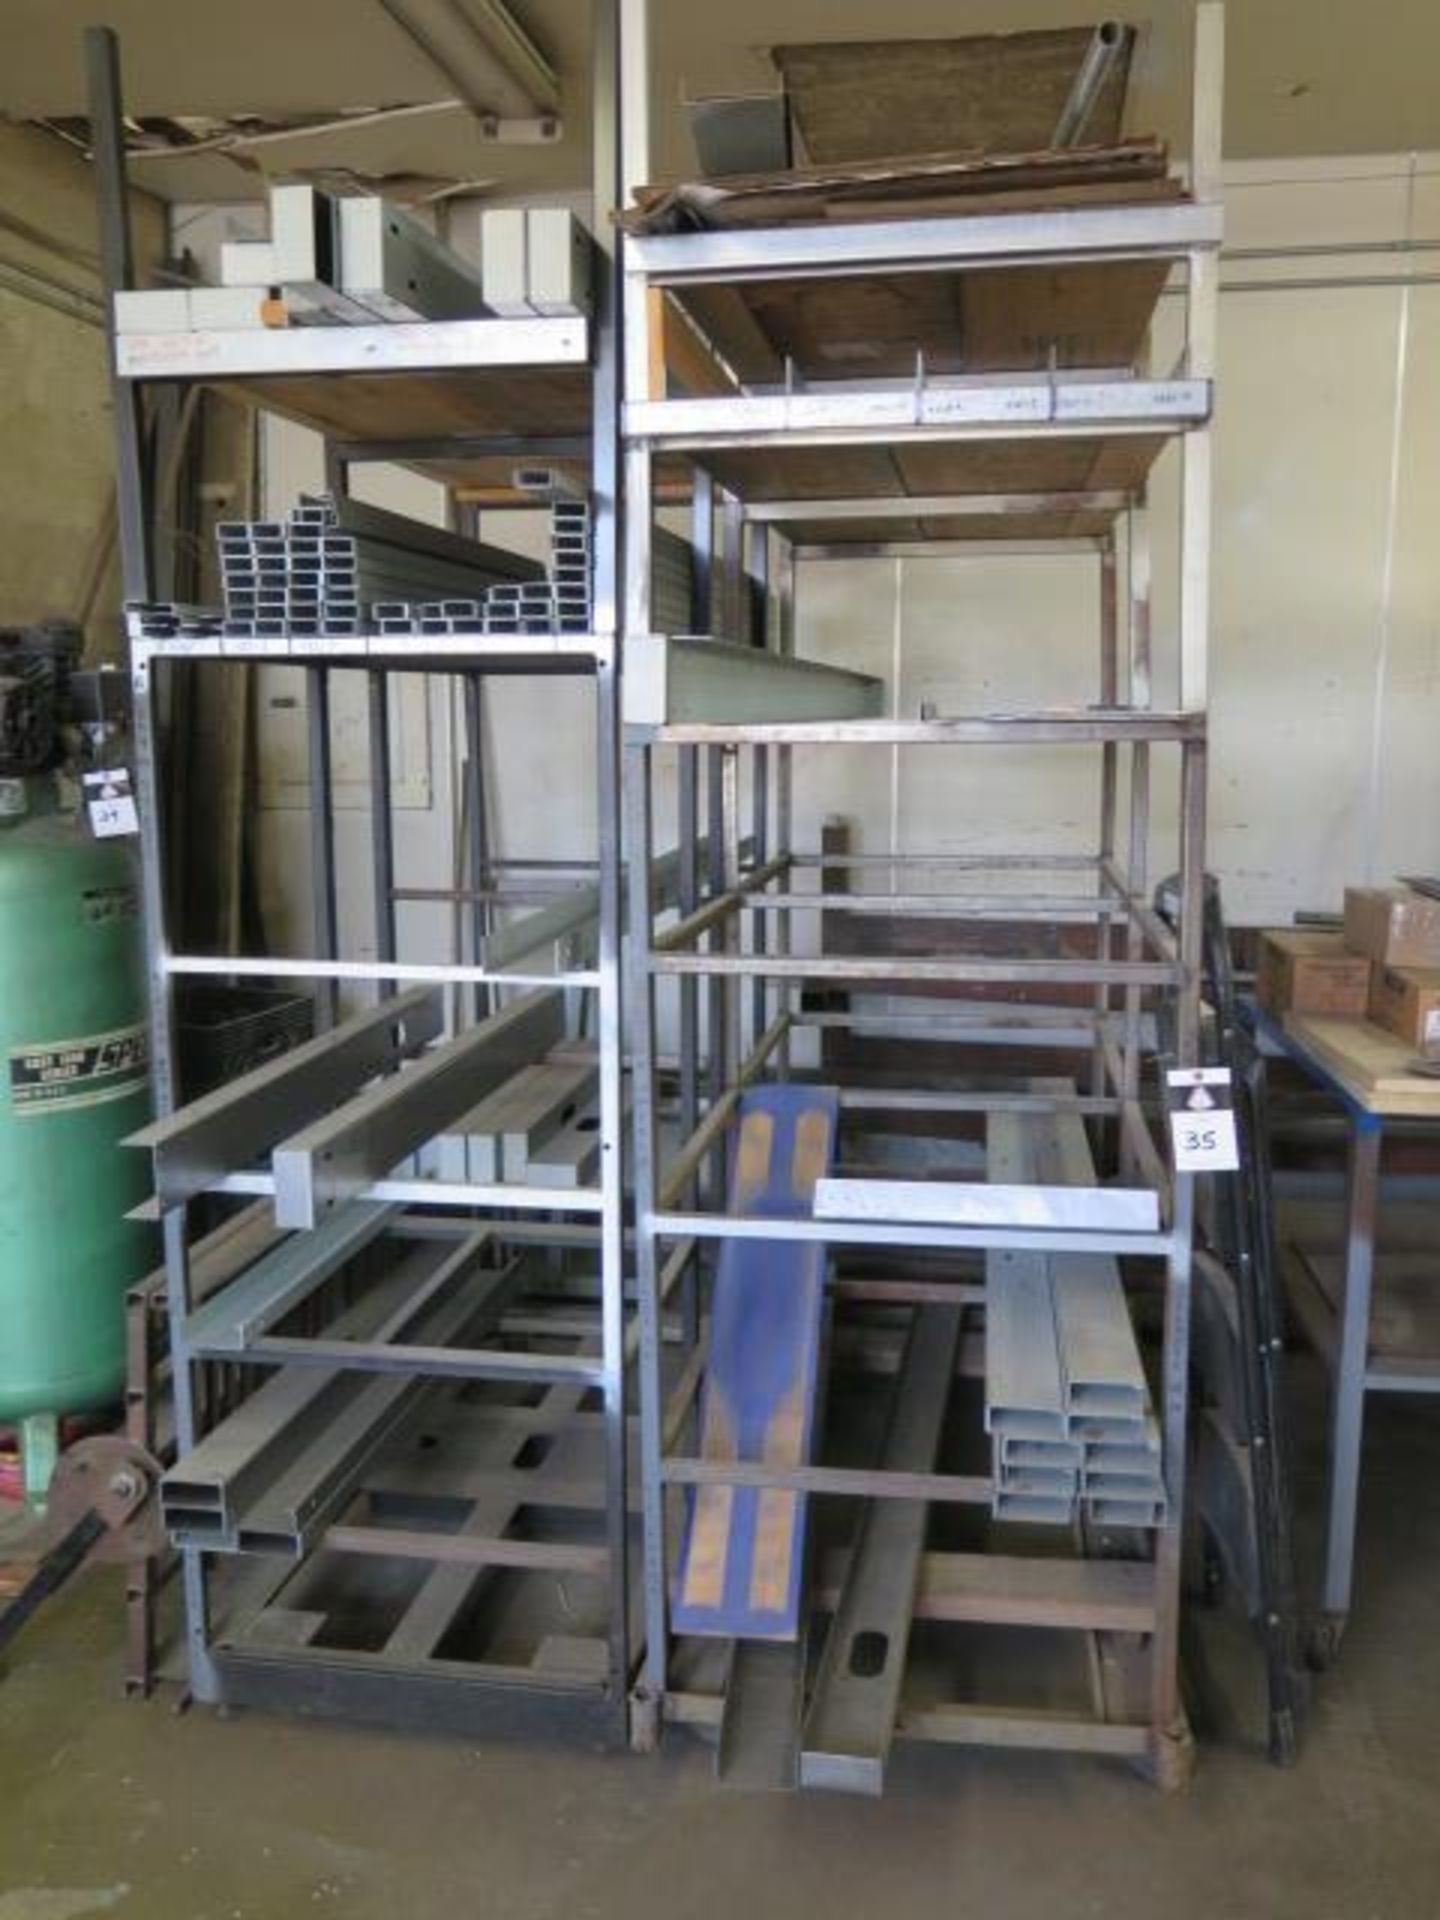 Shelves and Carts (SOLD AS-IS - NO WARRANTY)